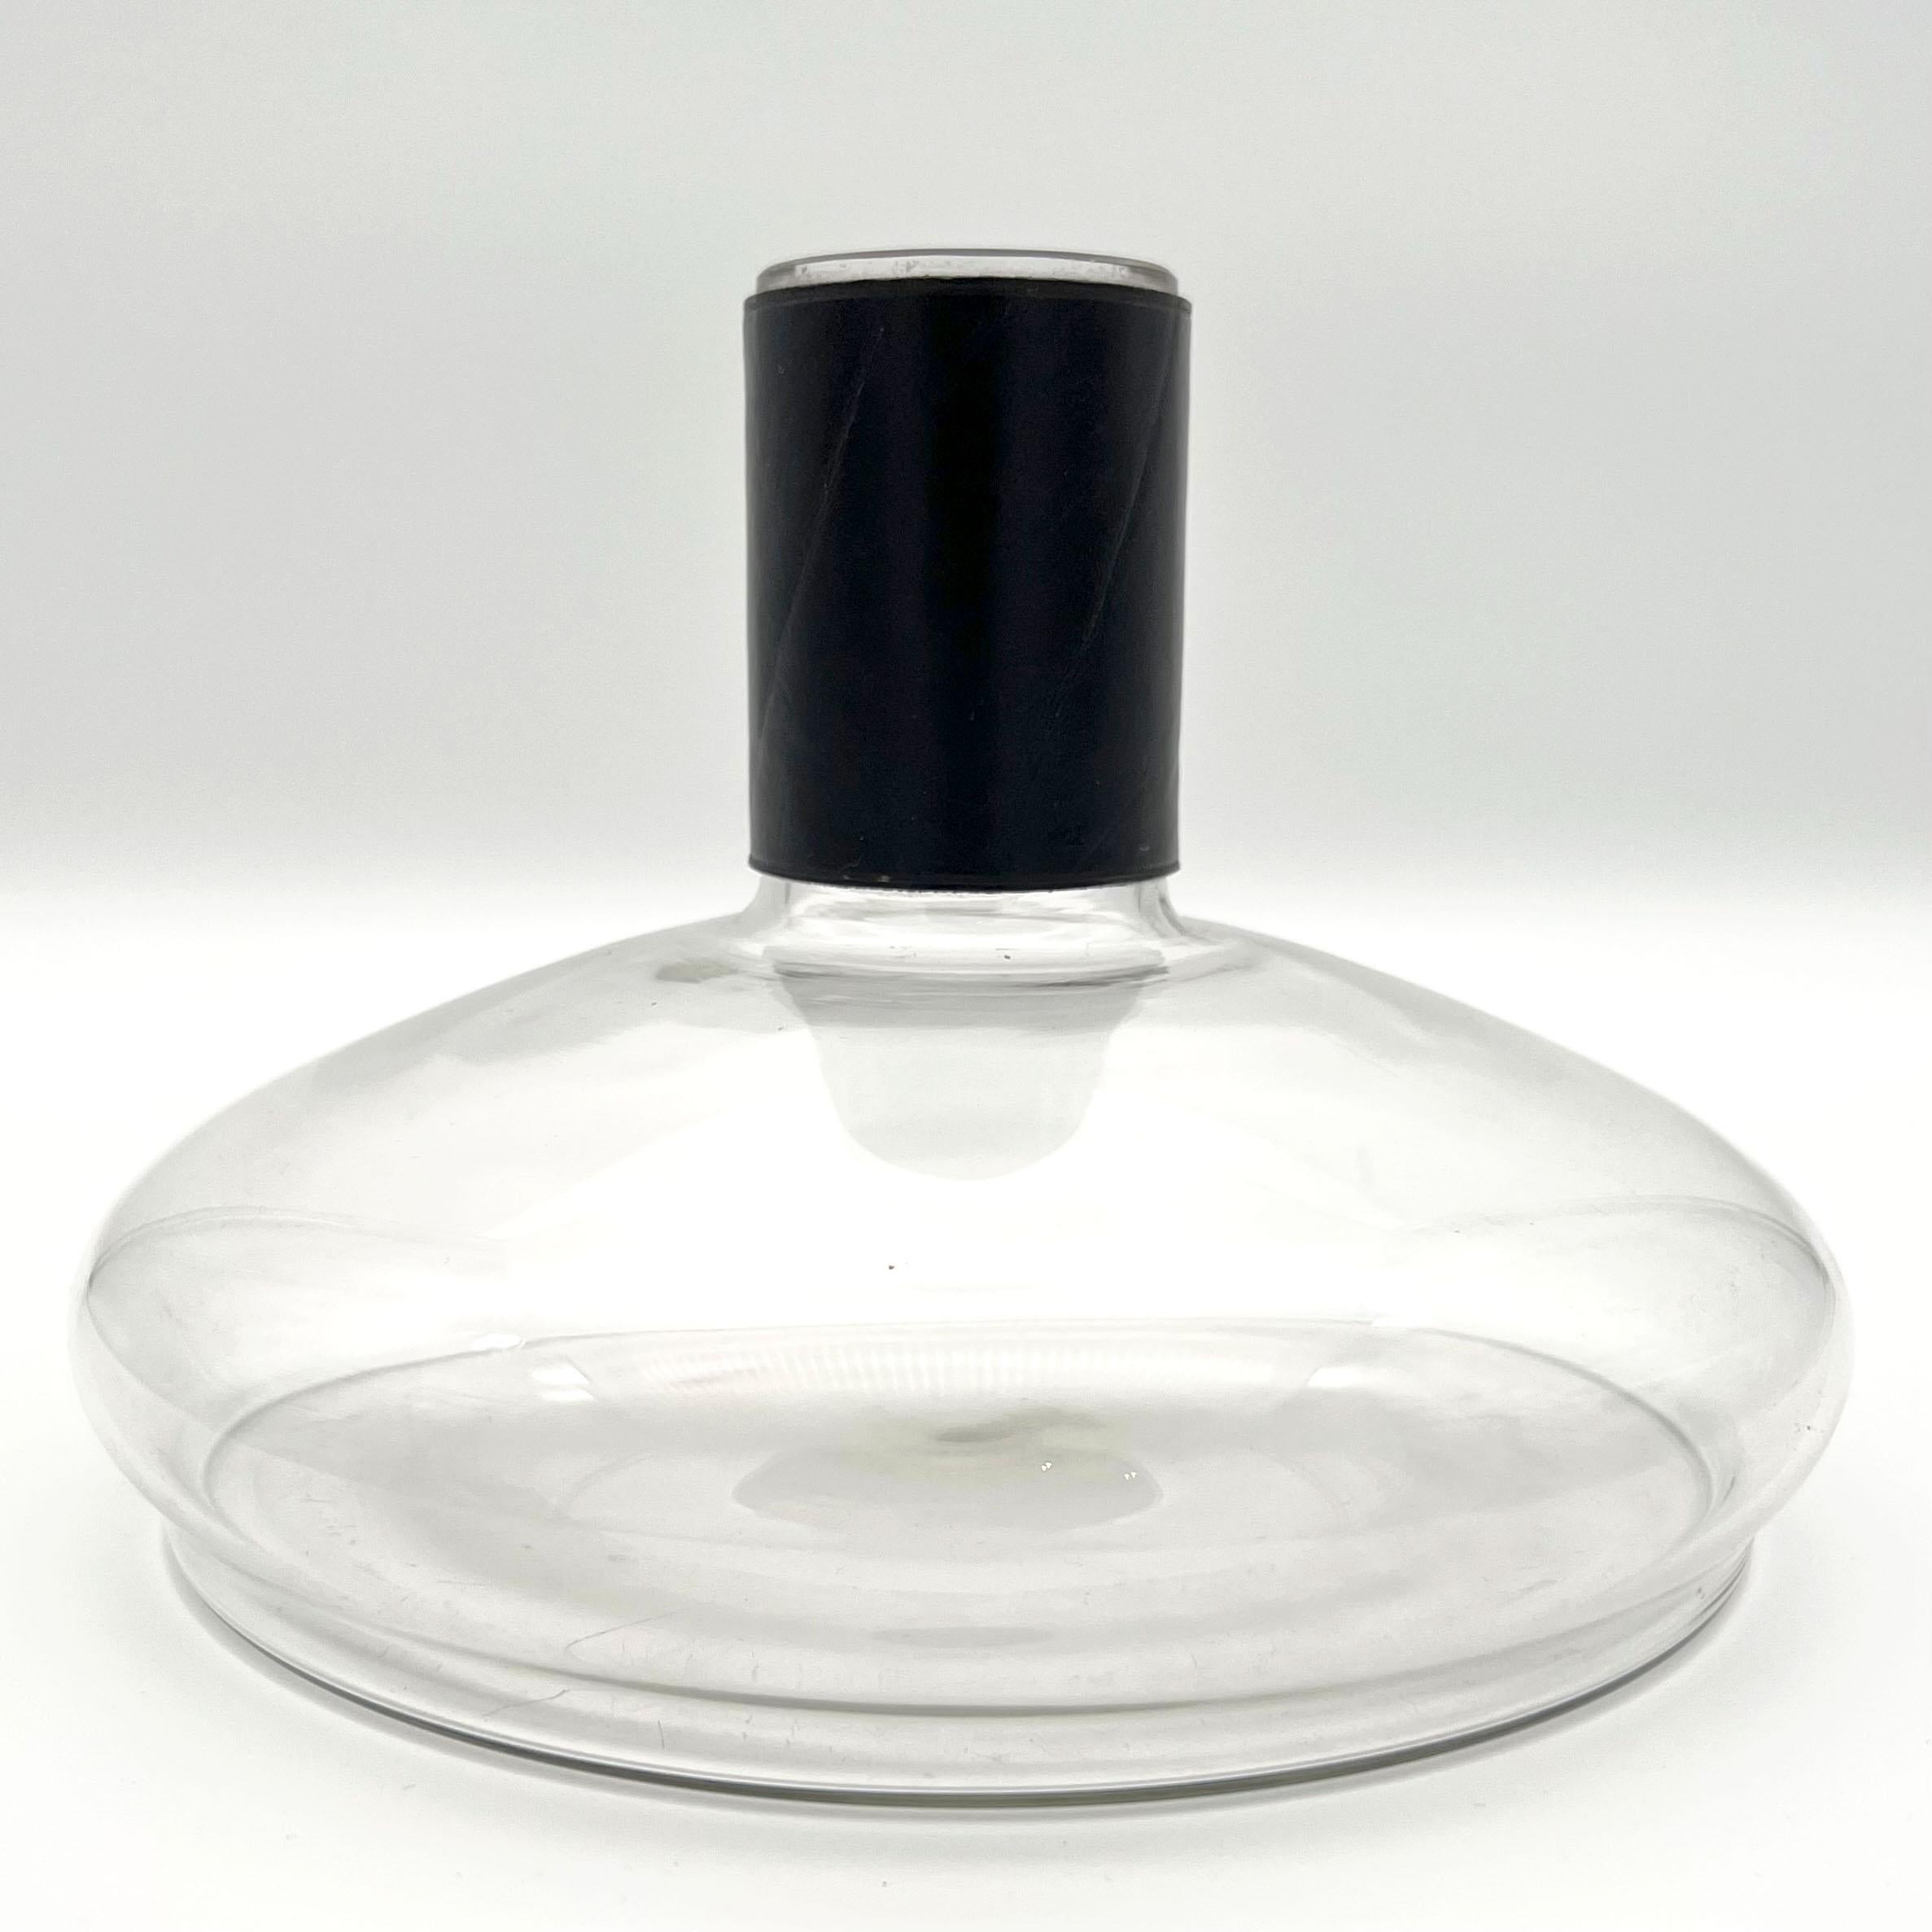 Carl Auböck II vase or decanter, 1950s, Made in Austria.
A glass decanter/ vase with a hand sewn leather drip stop/ leather-bound sleeve on the neck of the bottle.
Pictured in the catalog 